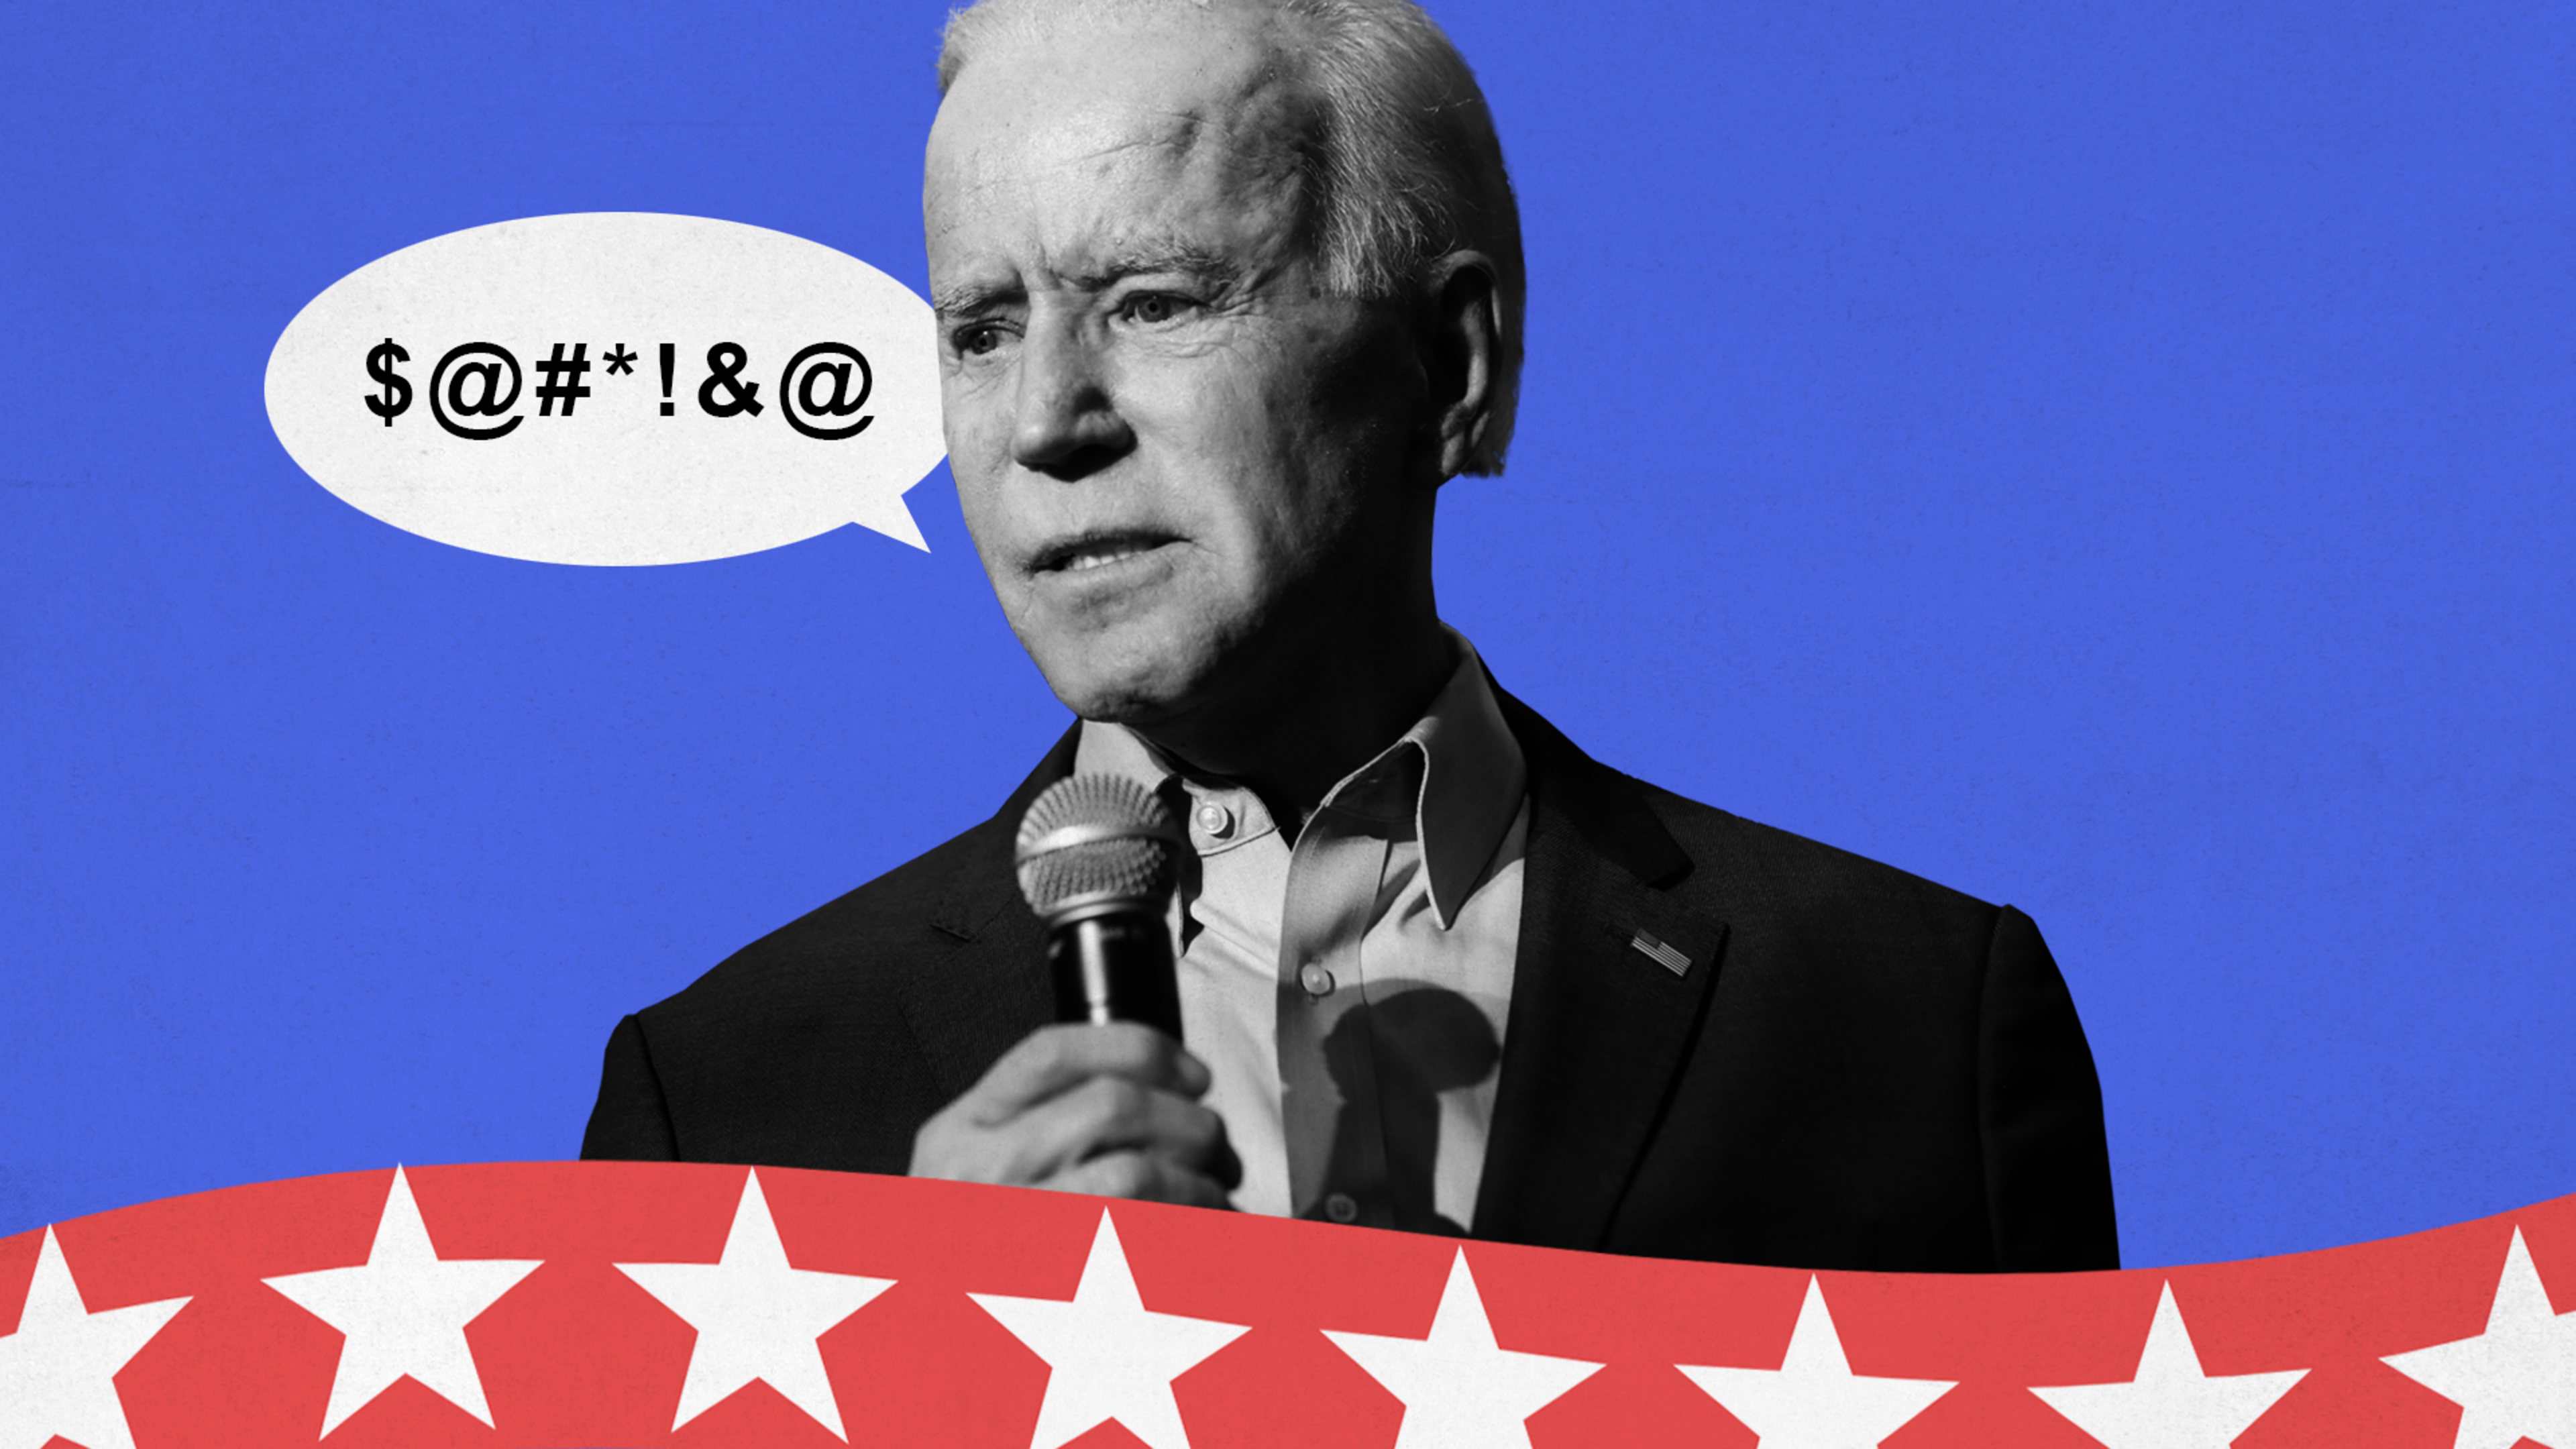 The worst debate strategy for Biden would be “When they go low, you go high”